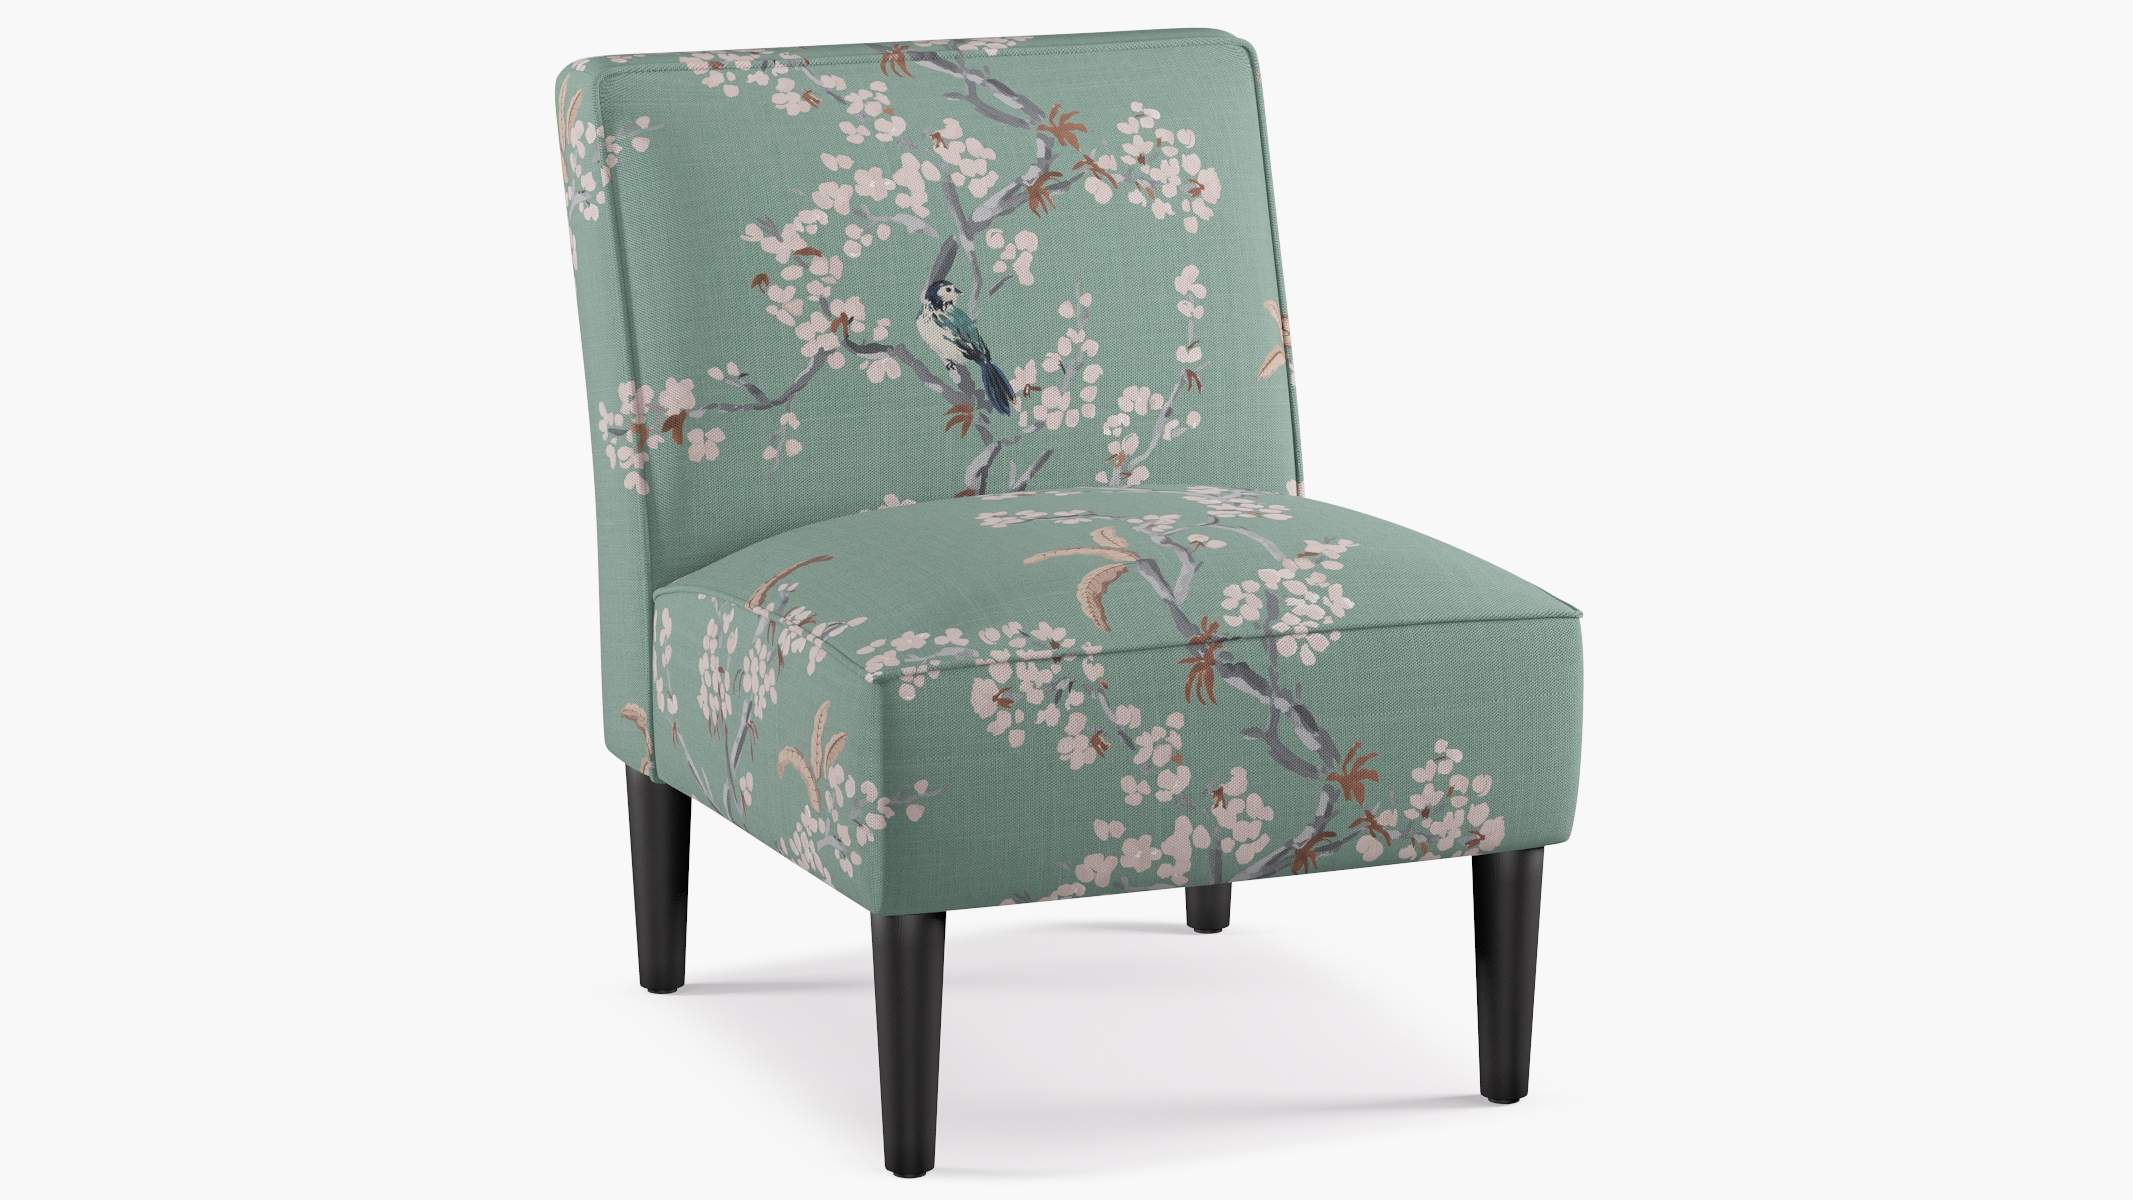 Mid-Century Accent Chair, Mint Cherry Blossom, Black - Image 1